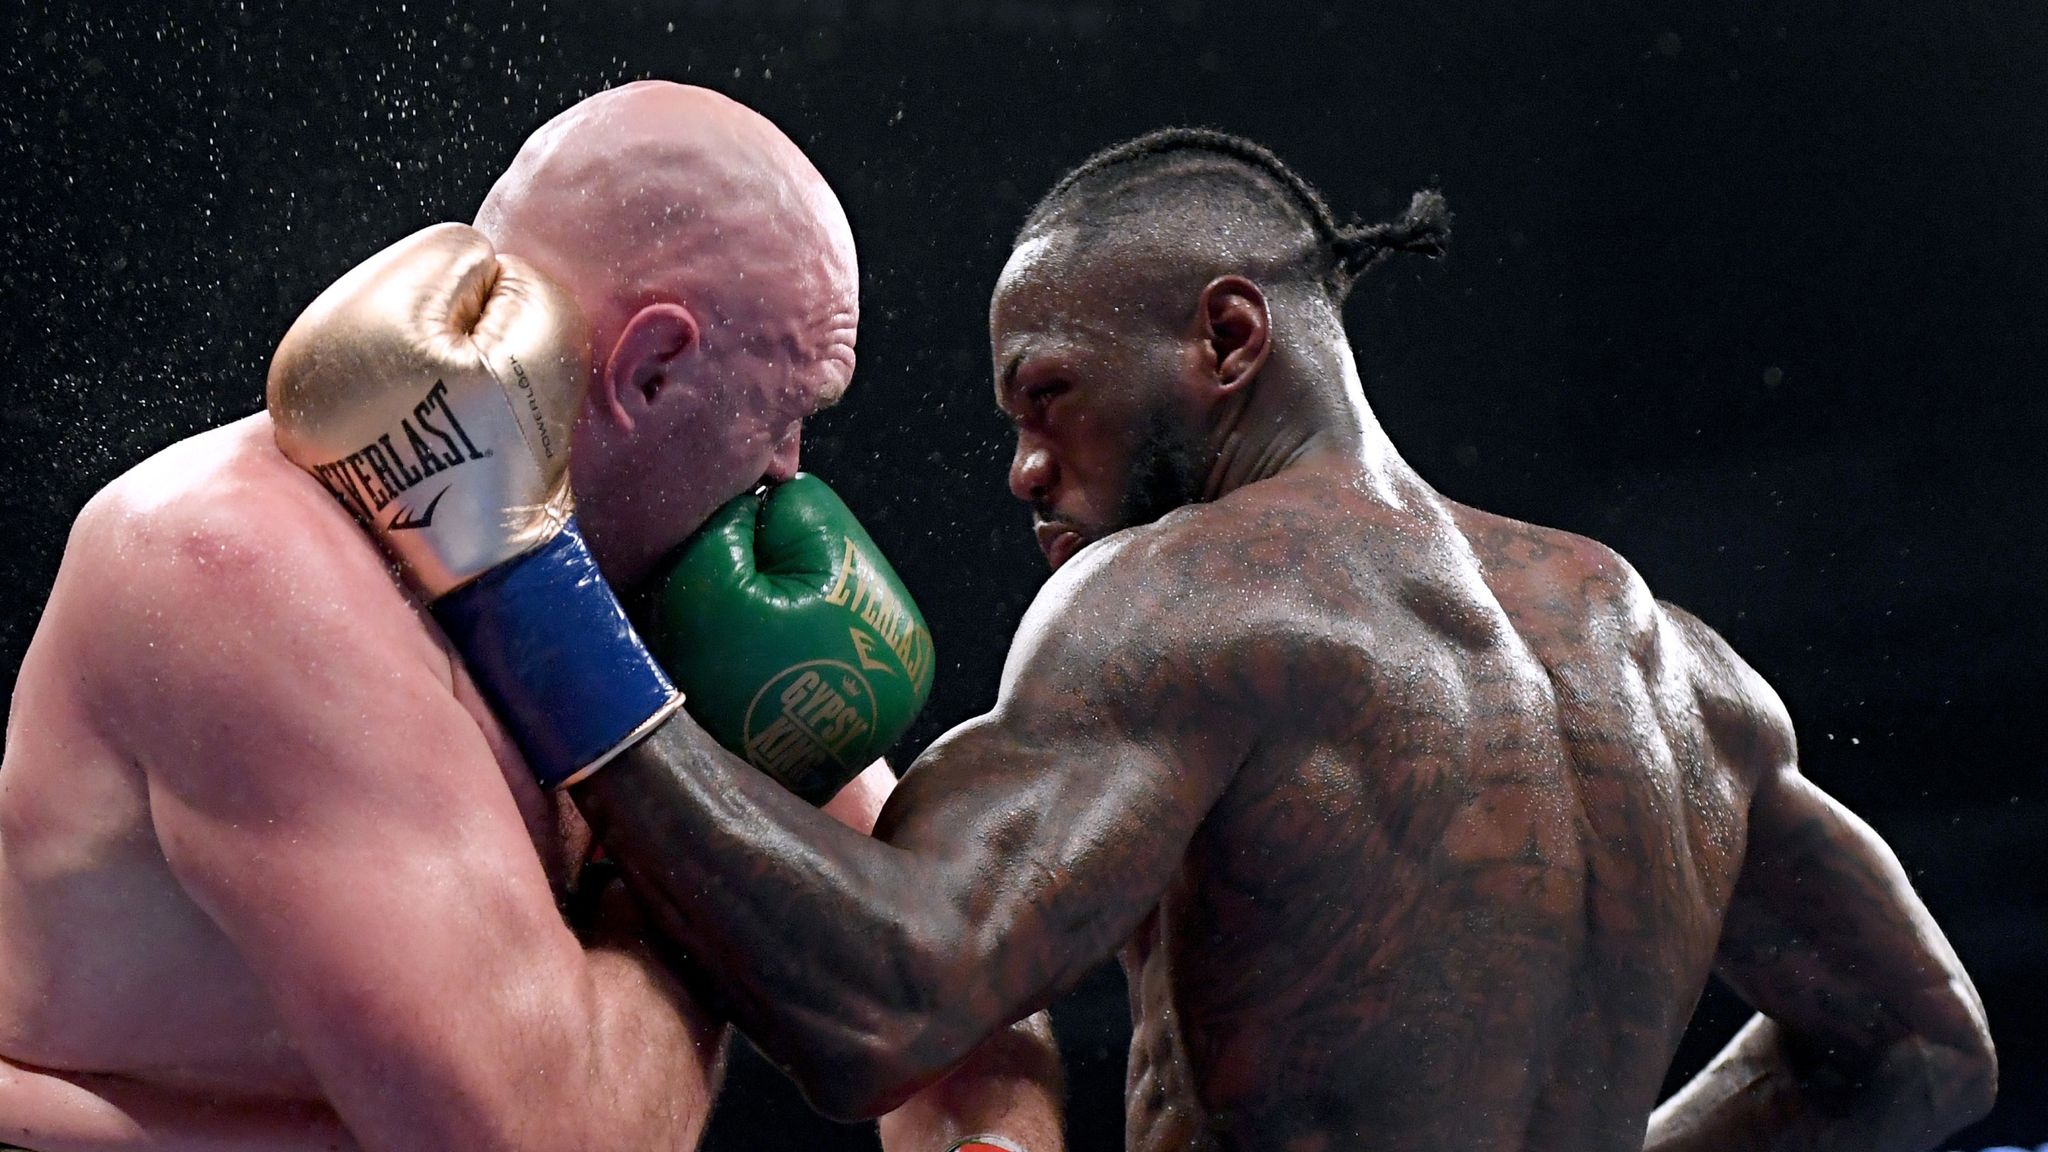 Tyson Fury vs. Deontay Wilder 2 results, takeaways: 'Gypsy King' dazzles as  a madman and a genius - CBSSports.com